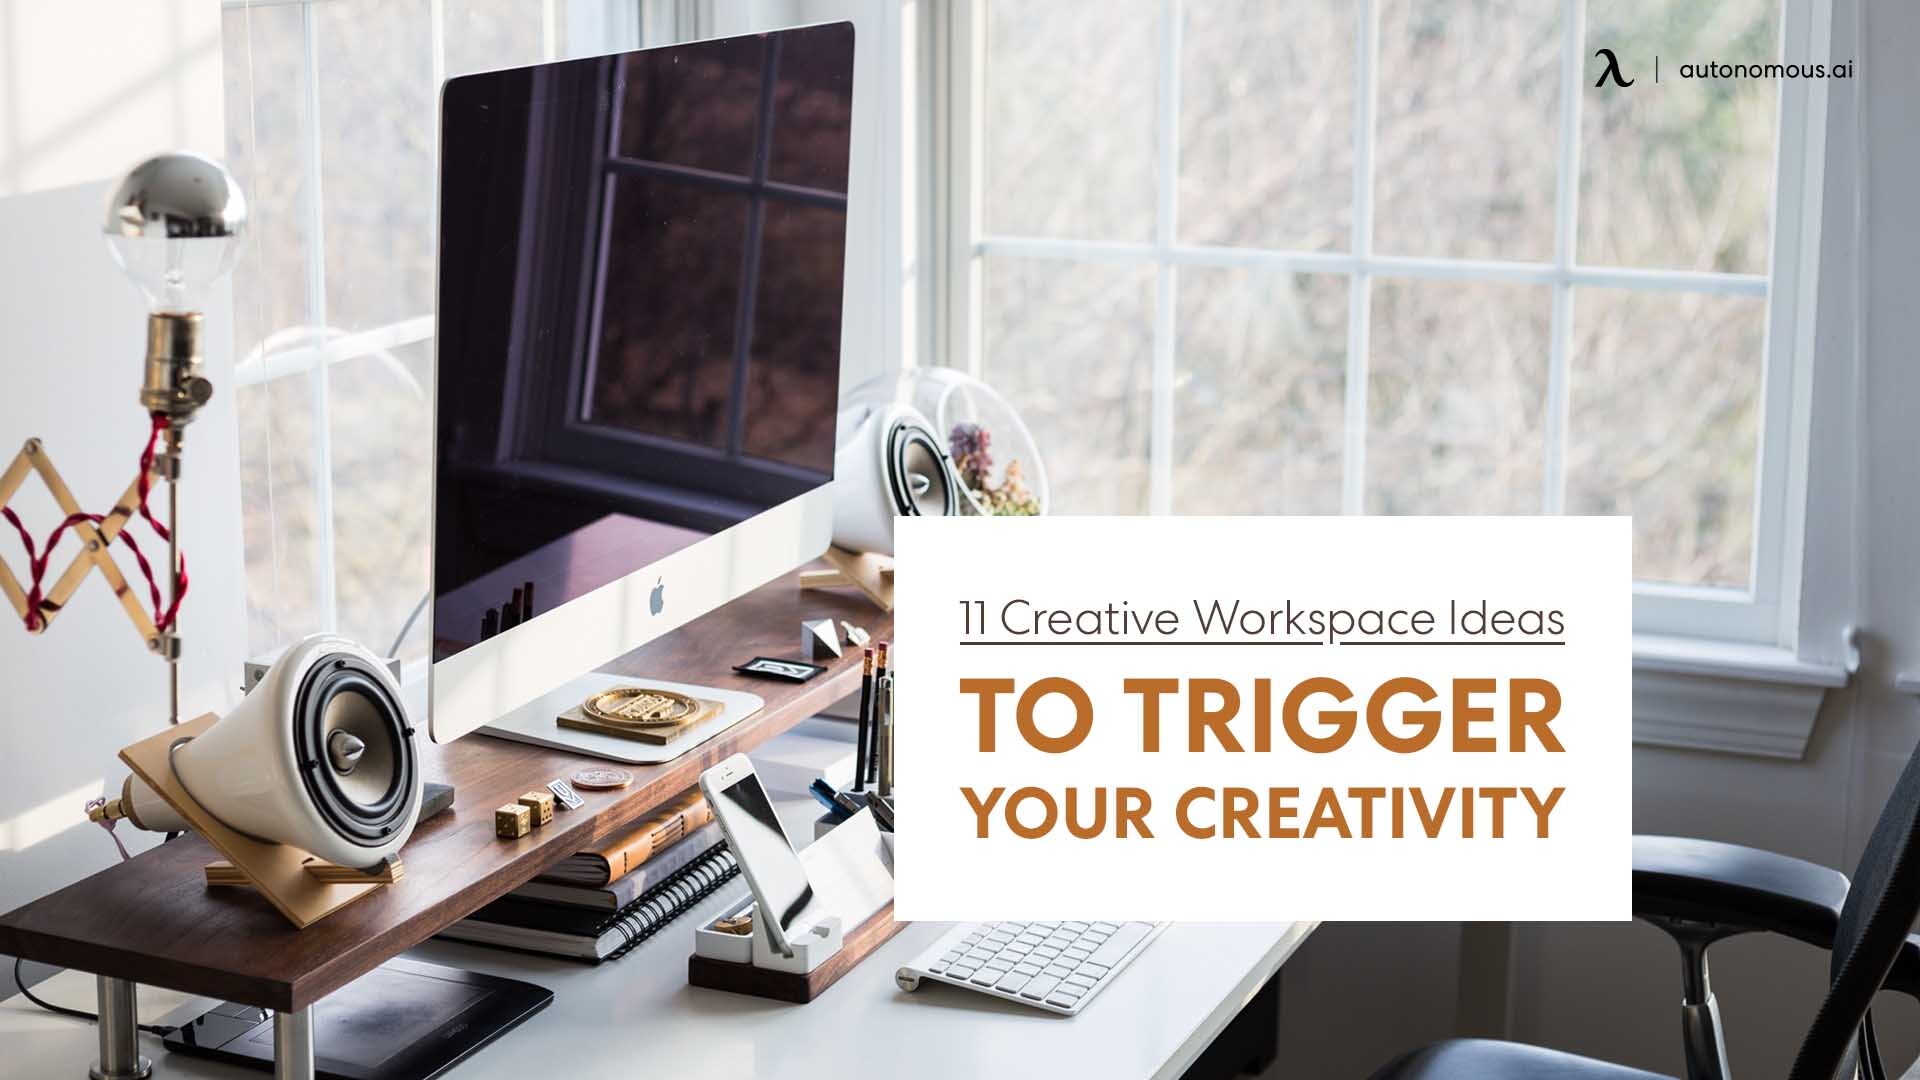 13 Creative Workspace Ideas to Trigger Your Creativity